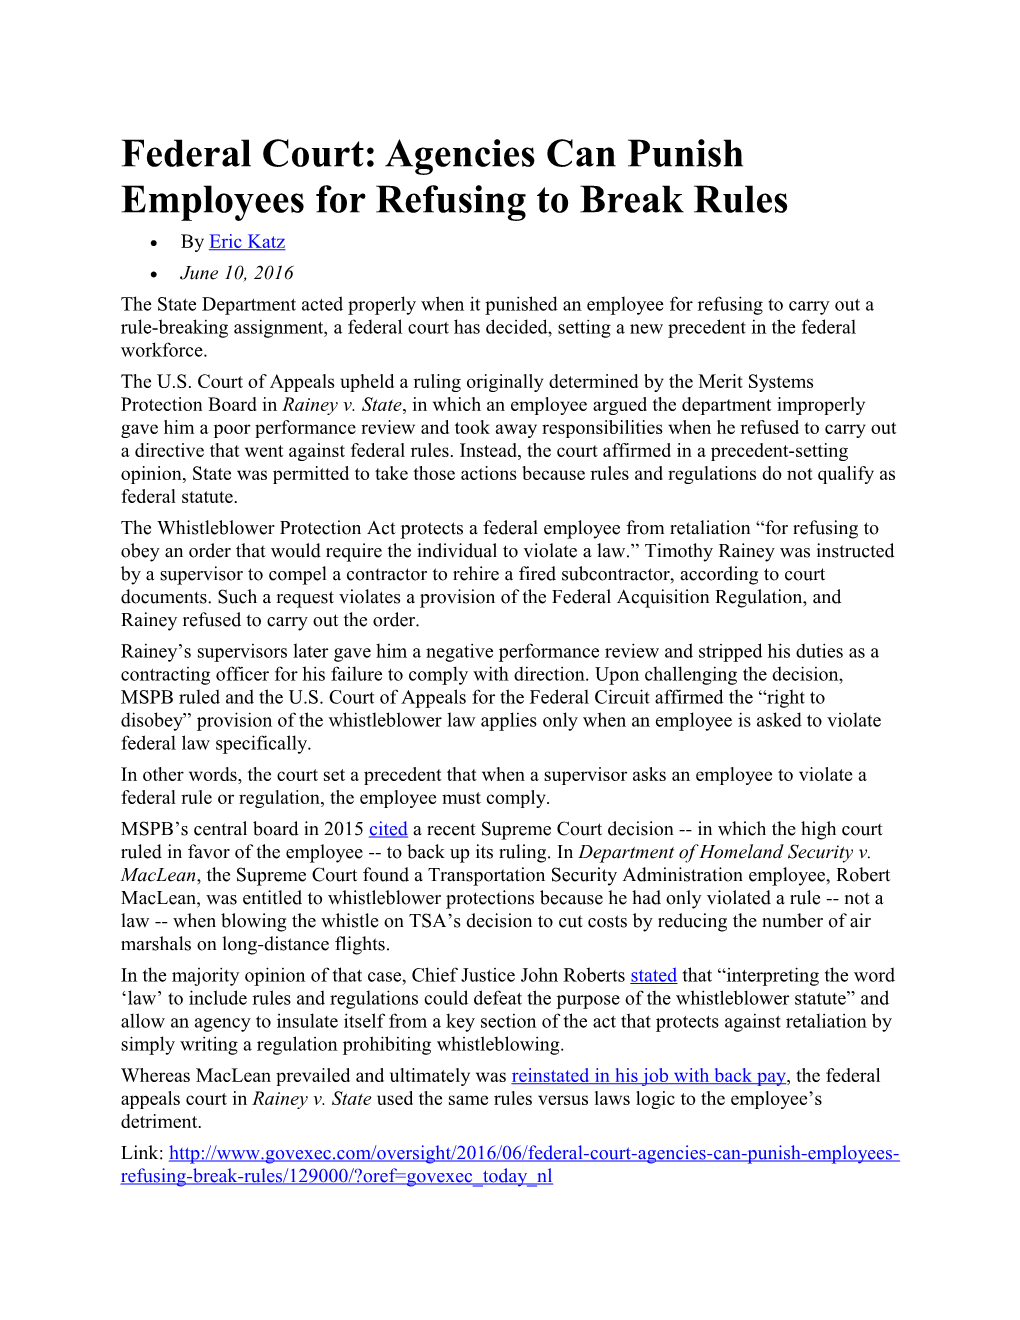 Federal Court: Agencies Can Punish Employees for Refusing to Break Rules